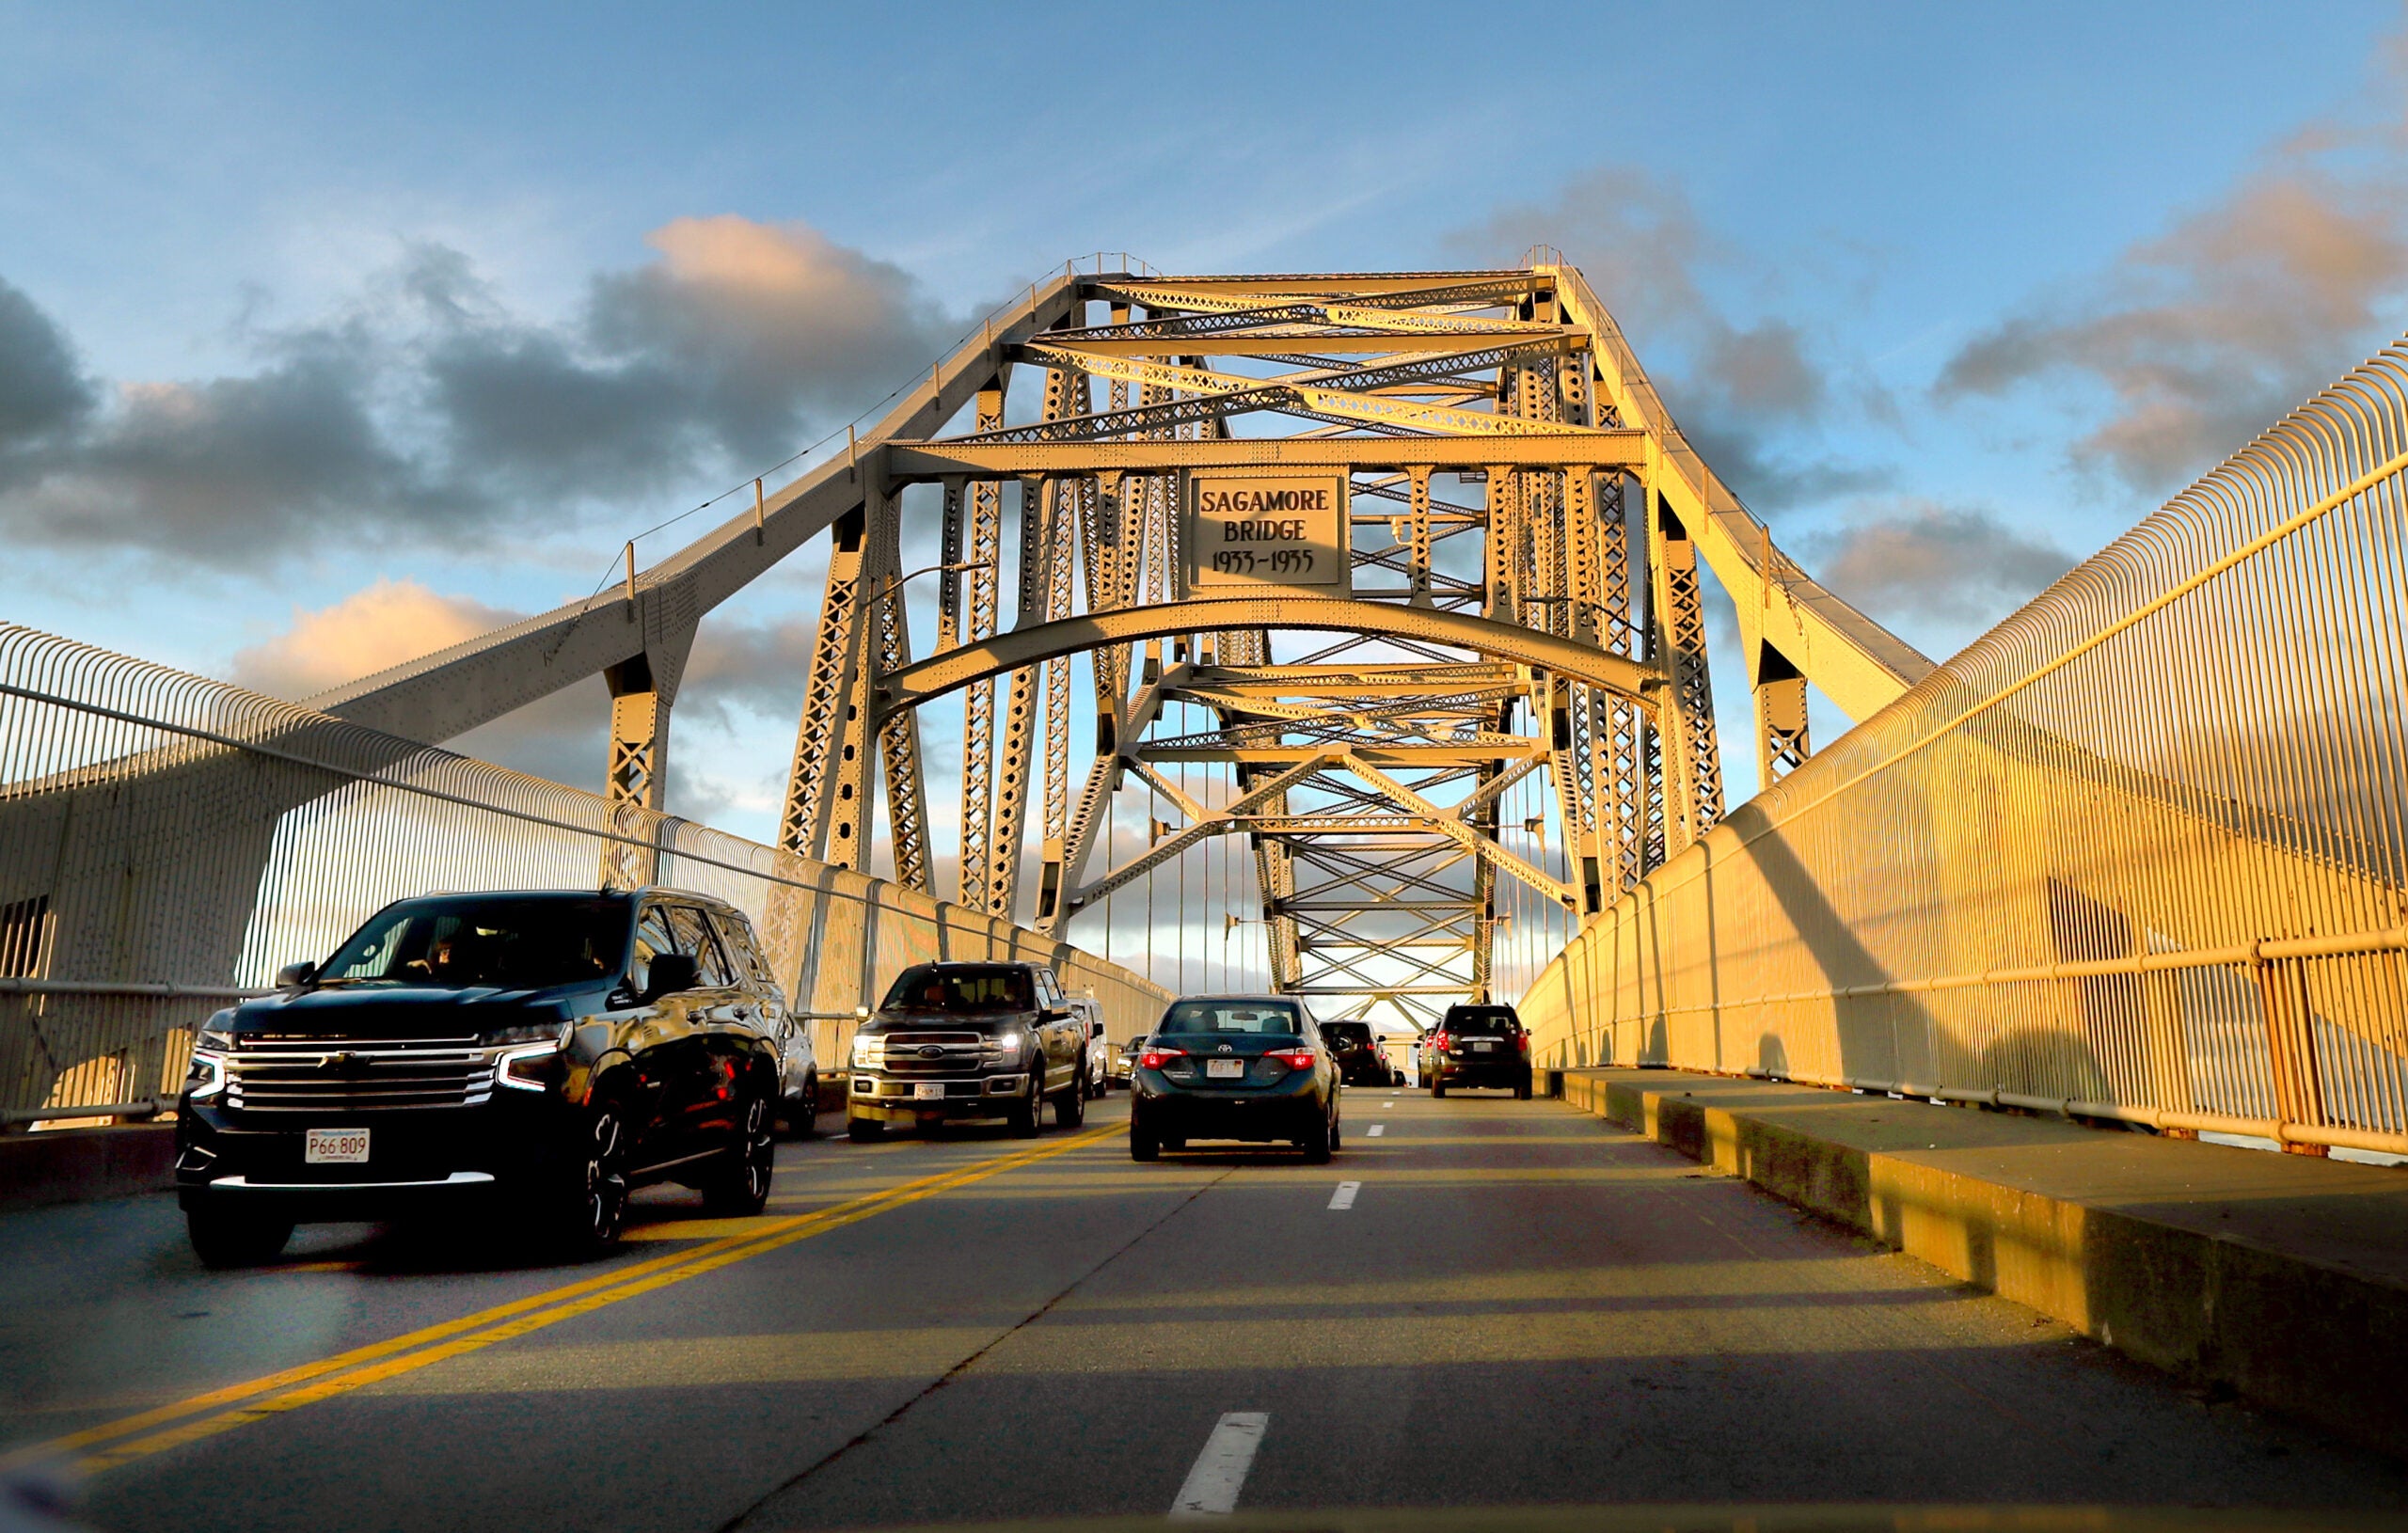 The sun reflects off the Sagamore Bridge as several cars drive across it.